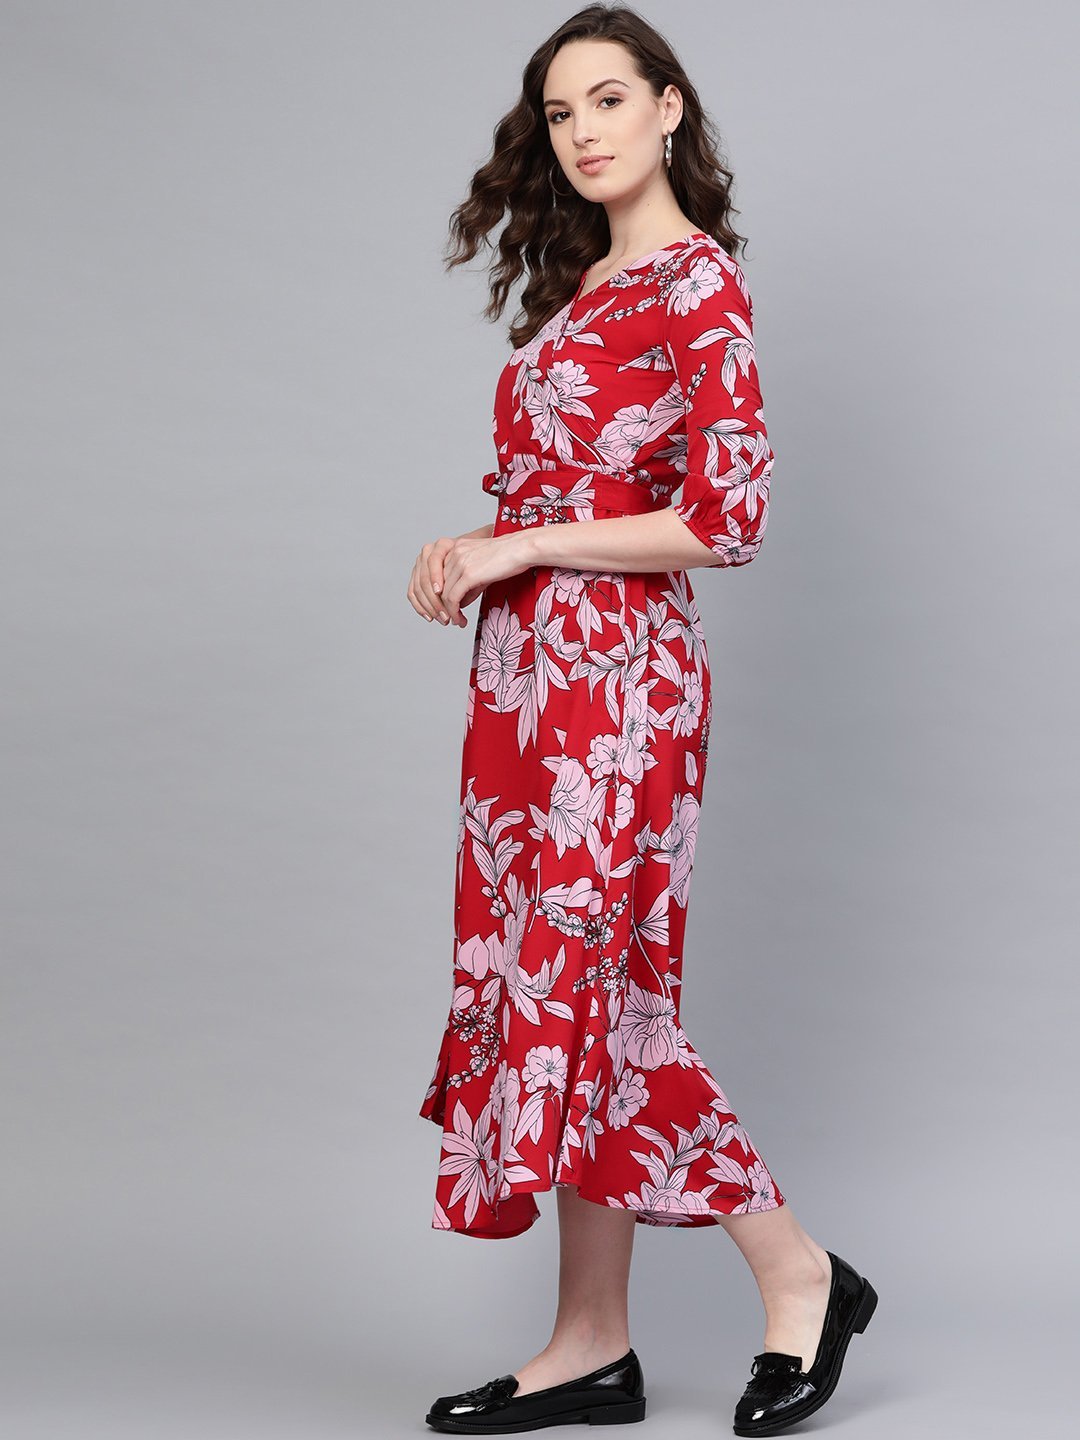 Women's Red Printed V Neck Casual Cute Party Dress - Stilento